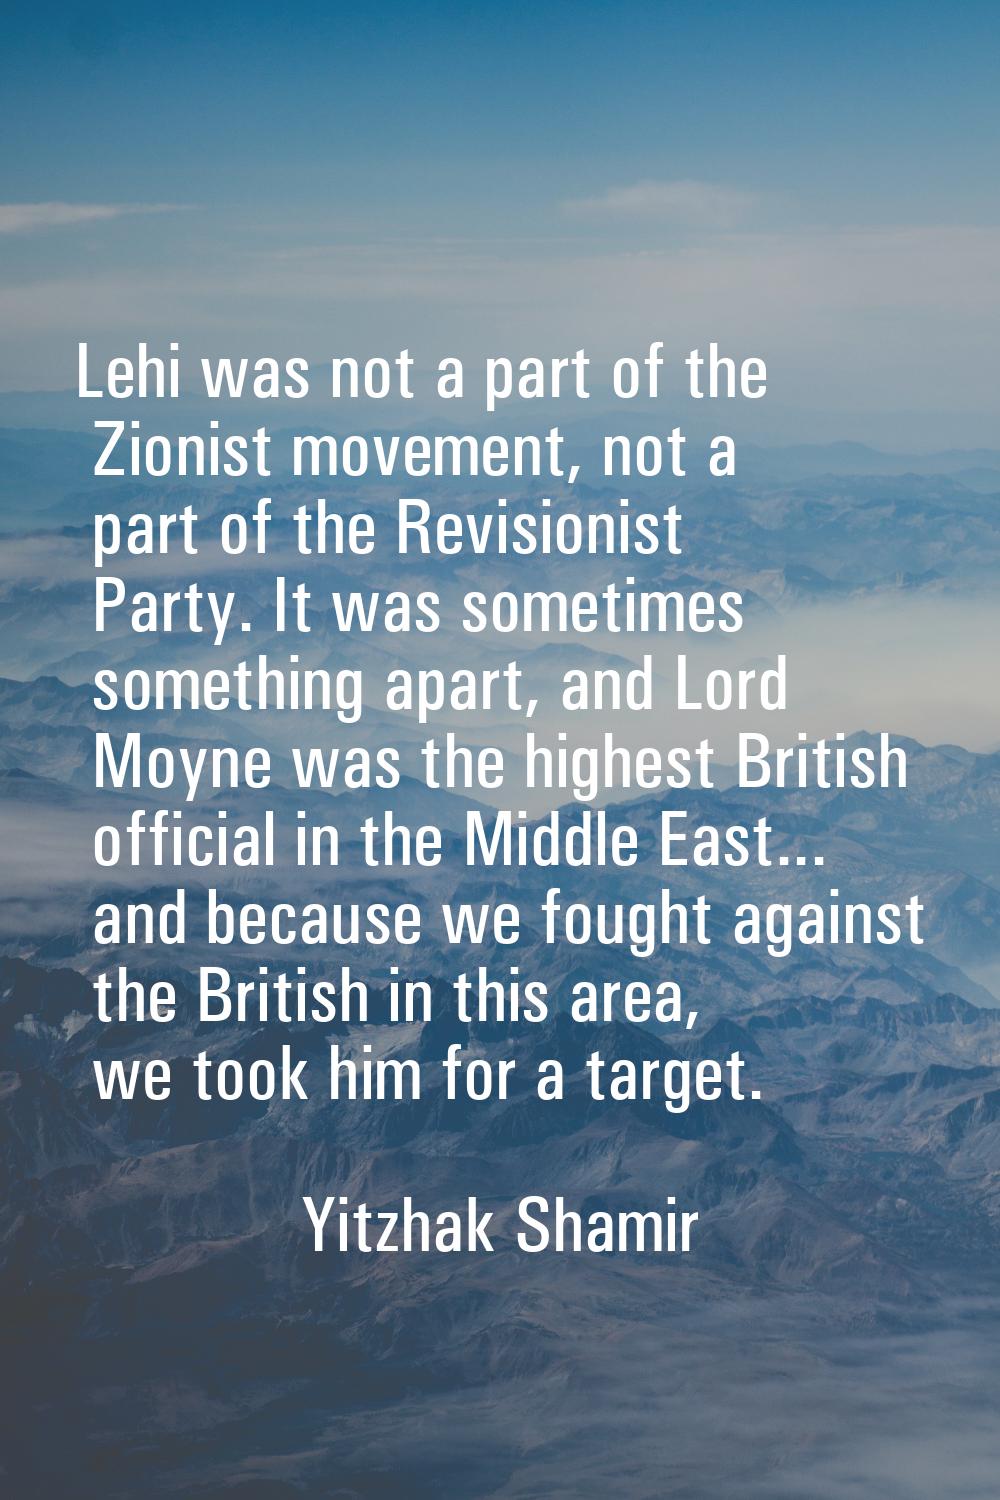 Lehi was not a part of the Zionist movement, not a part of the Revisionist Party. It was sometimes 